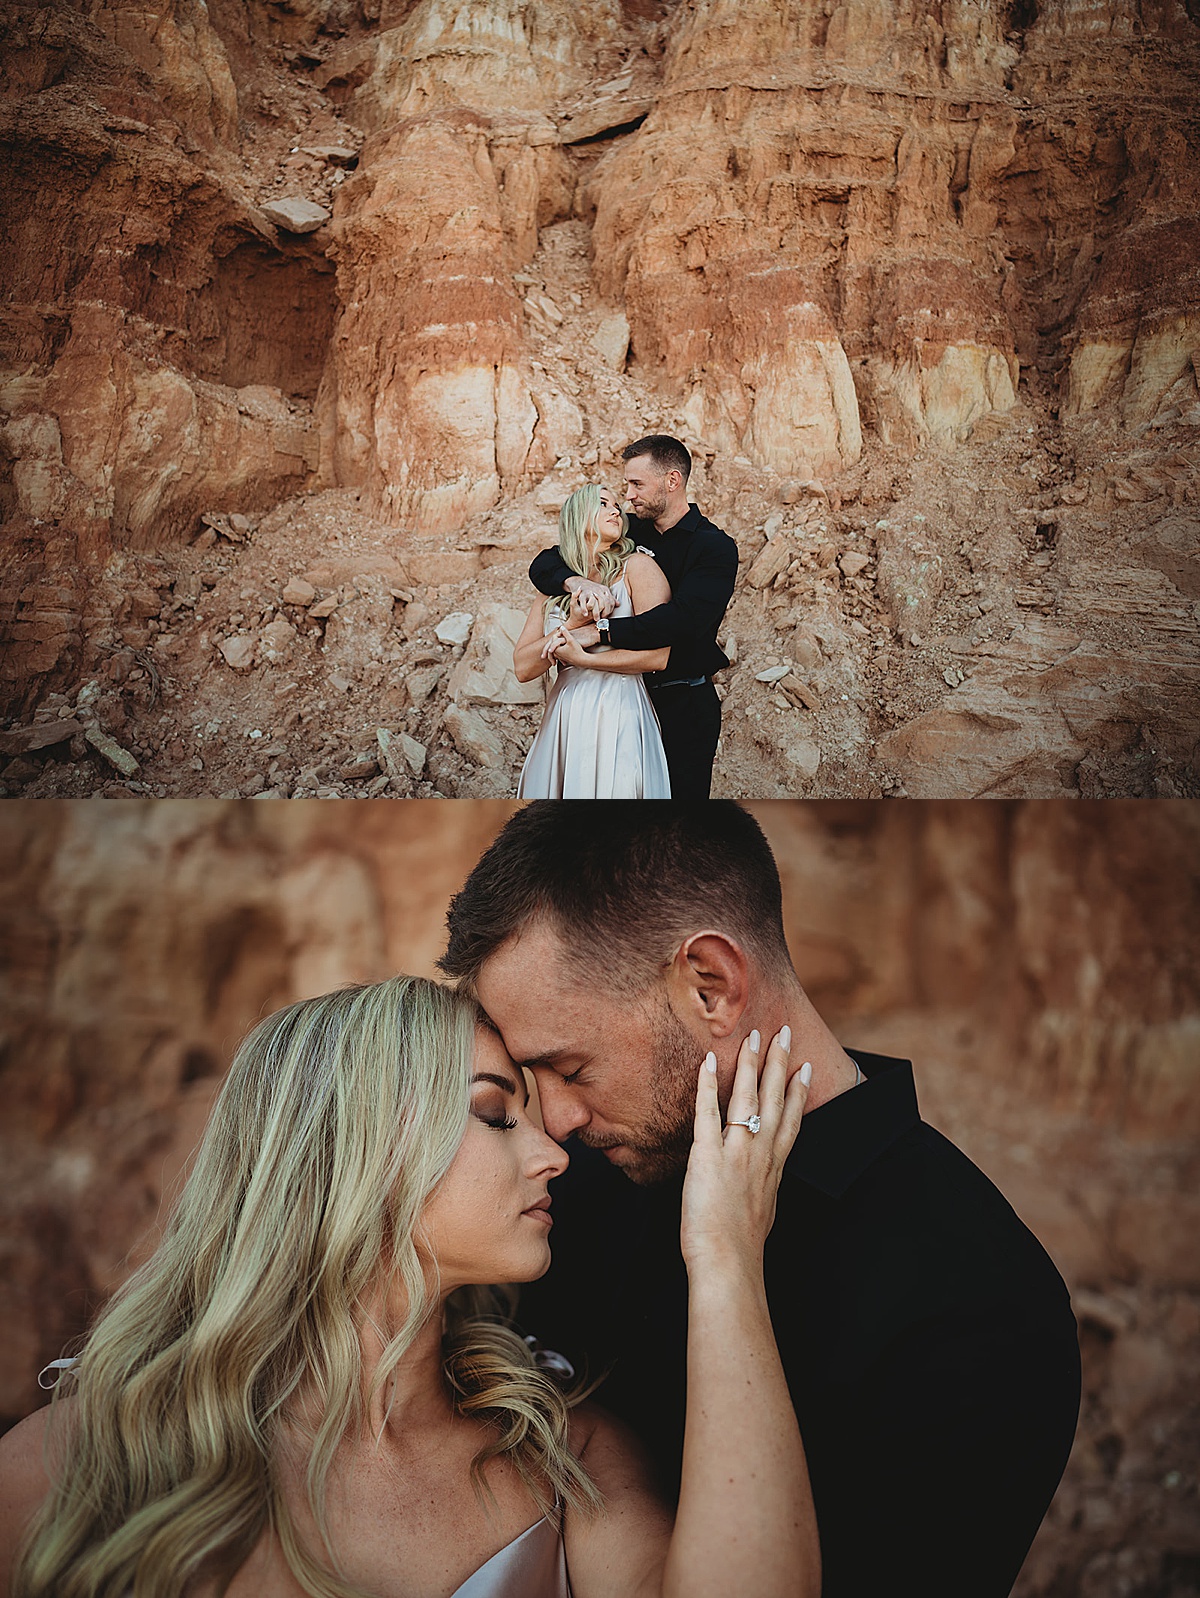 couple pose in red rock canyon during magical quicksilver and moonlight engagement session